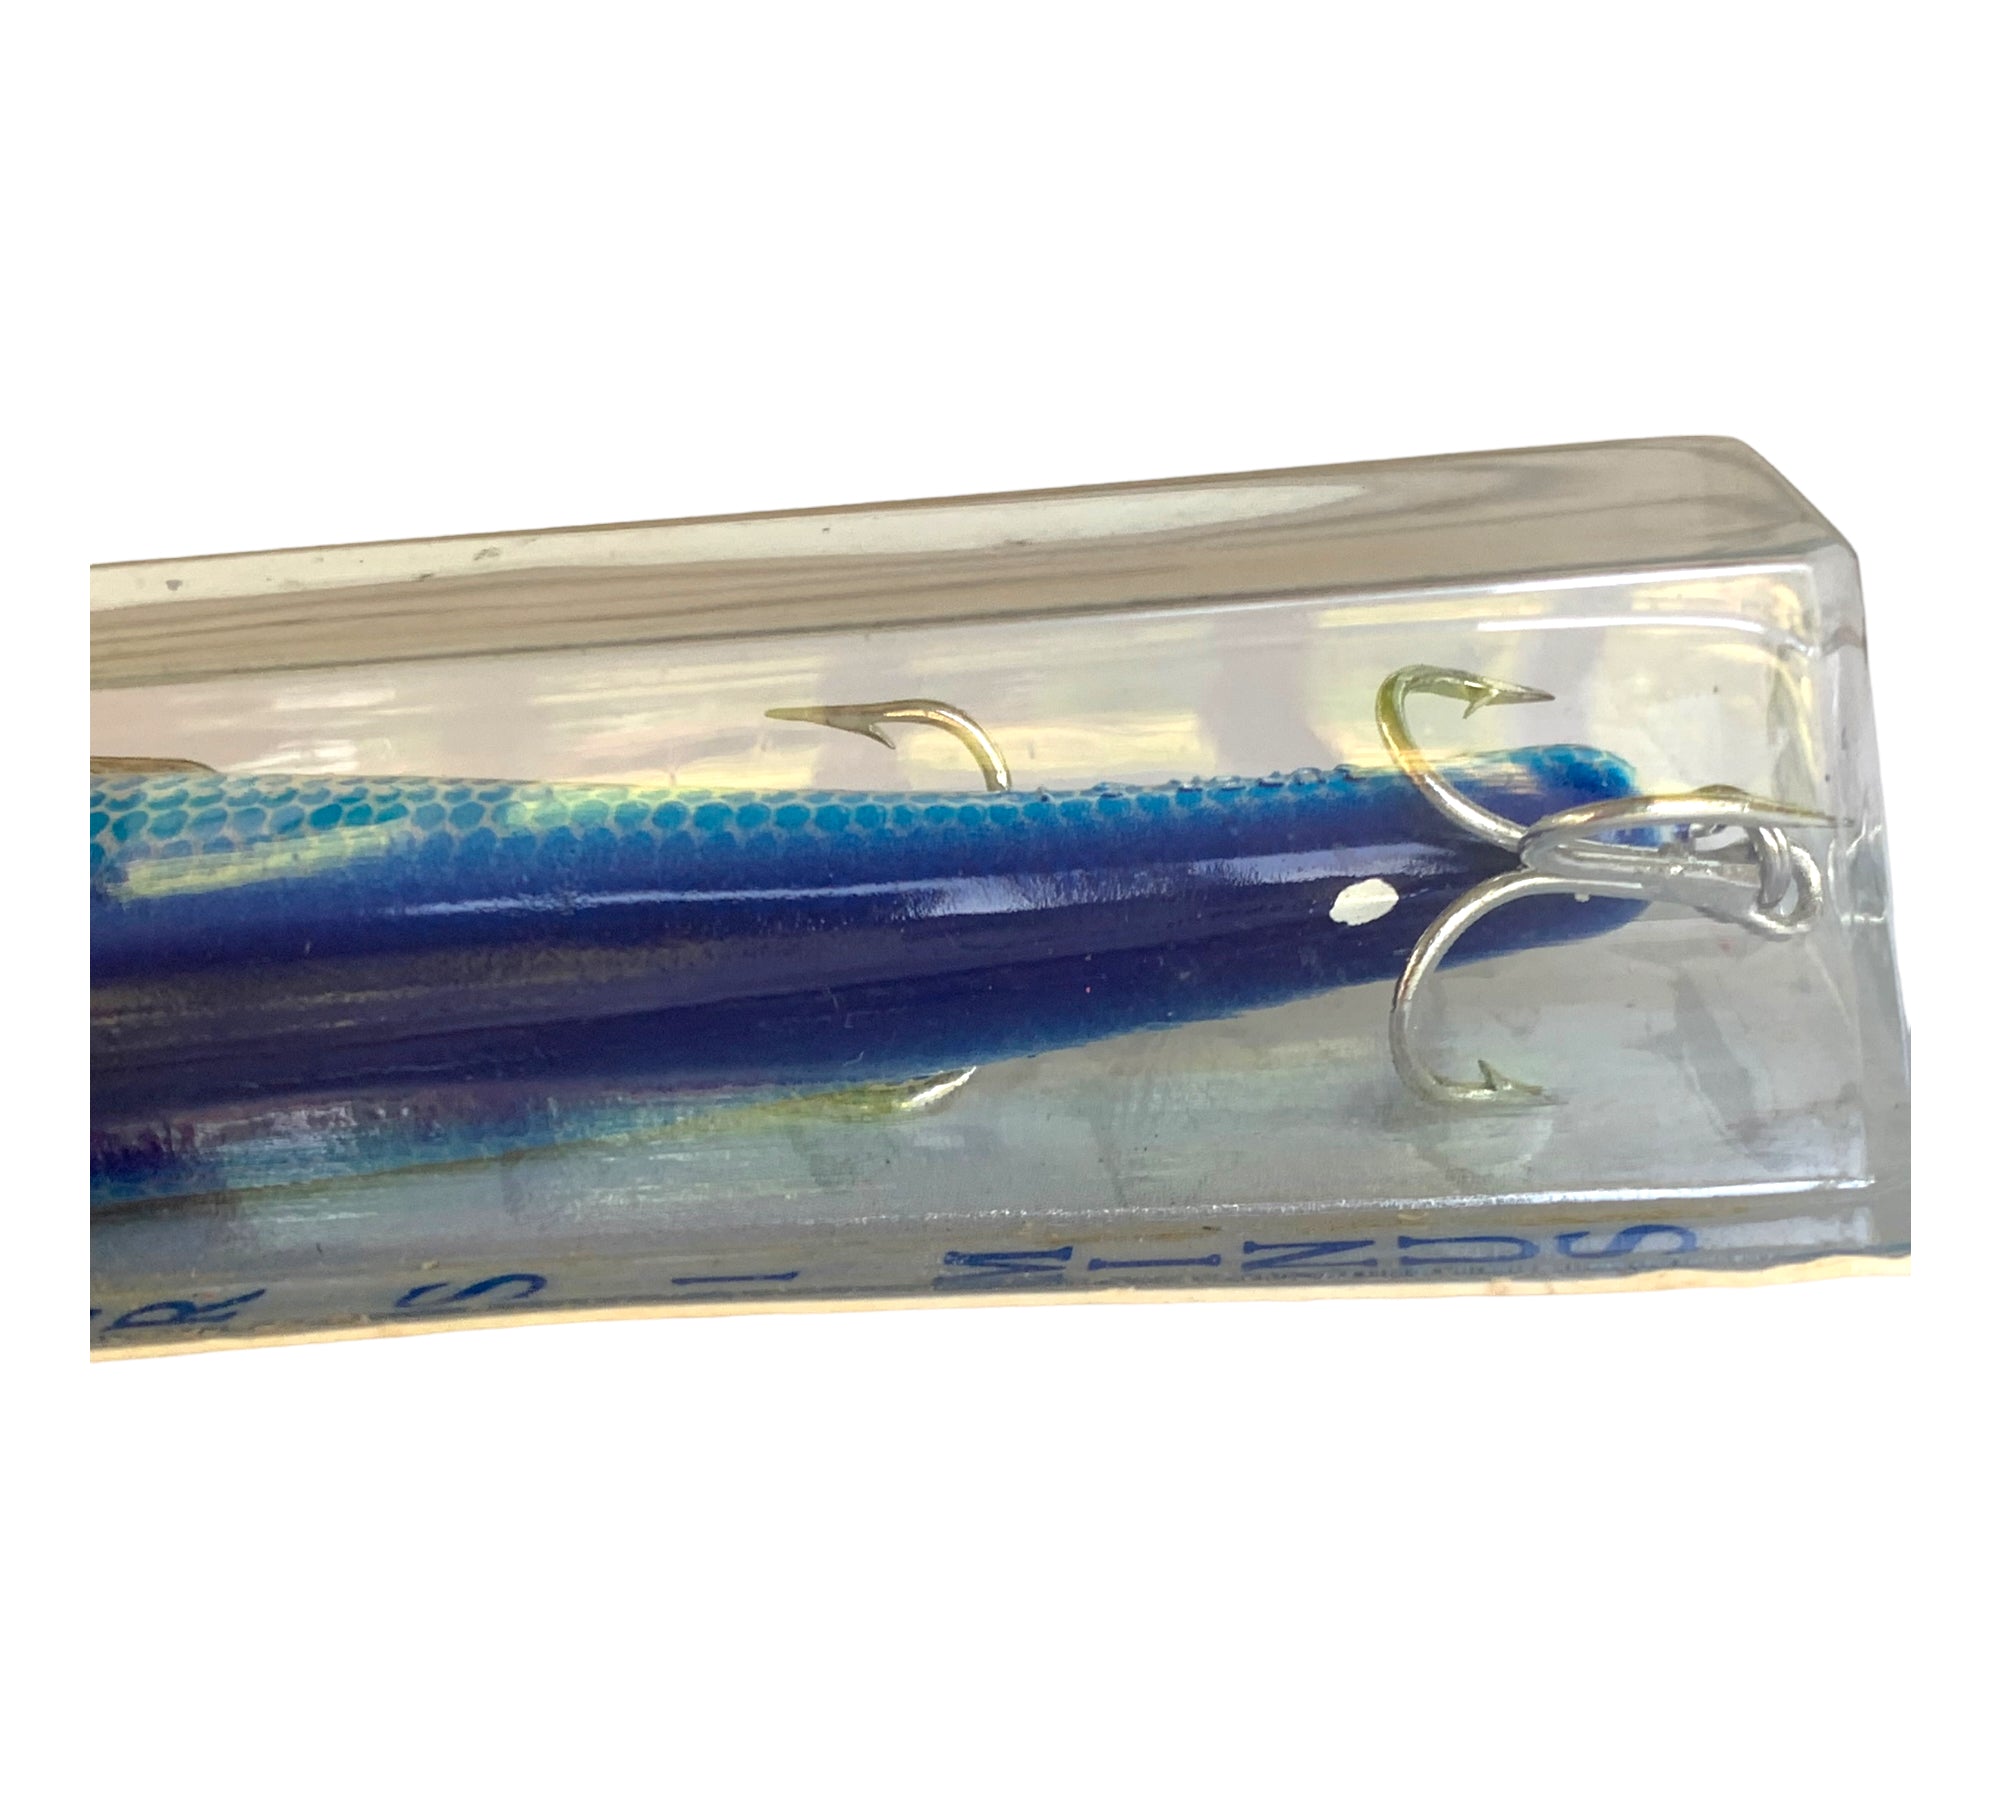 Mann's Bait Company SUPER STRETCH 1- (S 1-) Fishing Lure – Toad Tackle